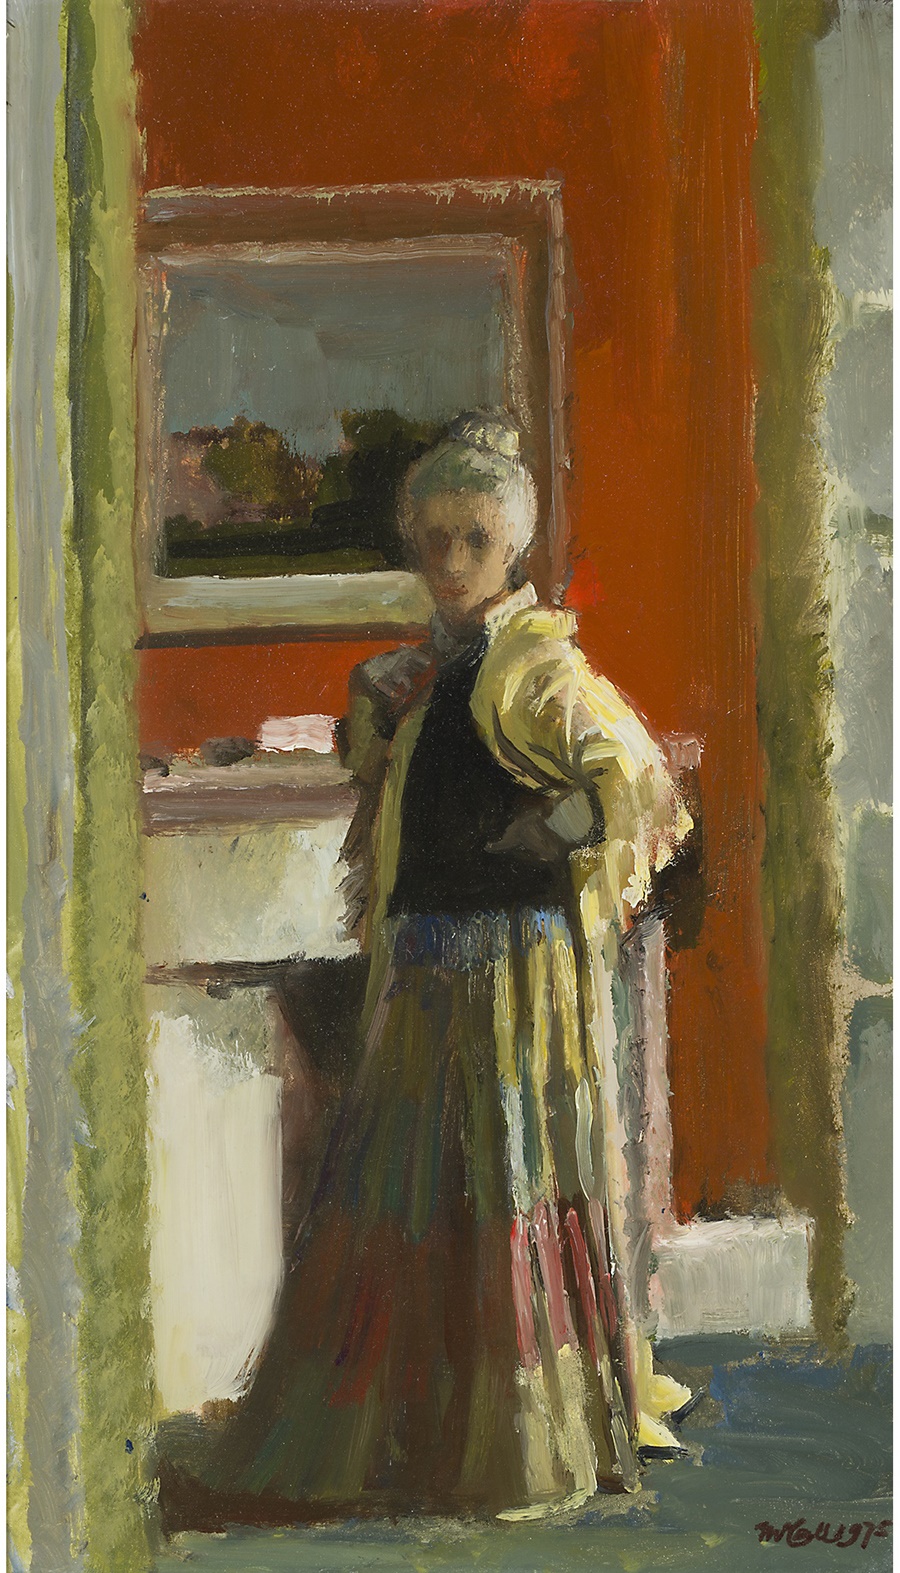 LOT 13 | § CHARLES JAMES MCCALL R.O.I (BRITISH 1907-1989) | MITZI, 1975 Signed and dated 1975, oil on board | 30cm x 17cm (12in x 6.75in) | £400 - £600 + fees